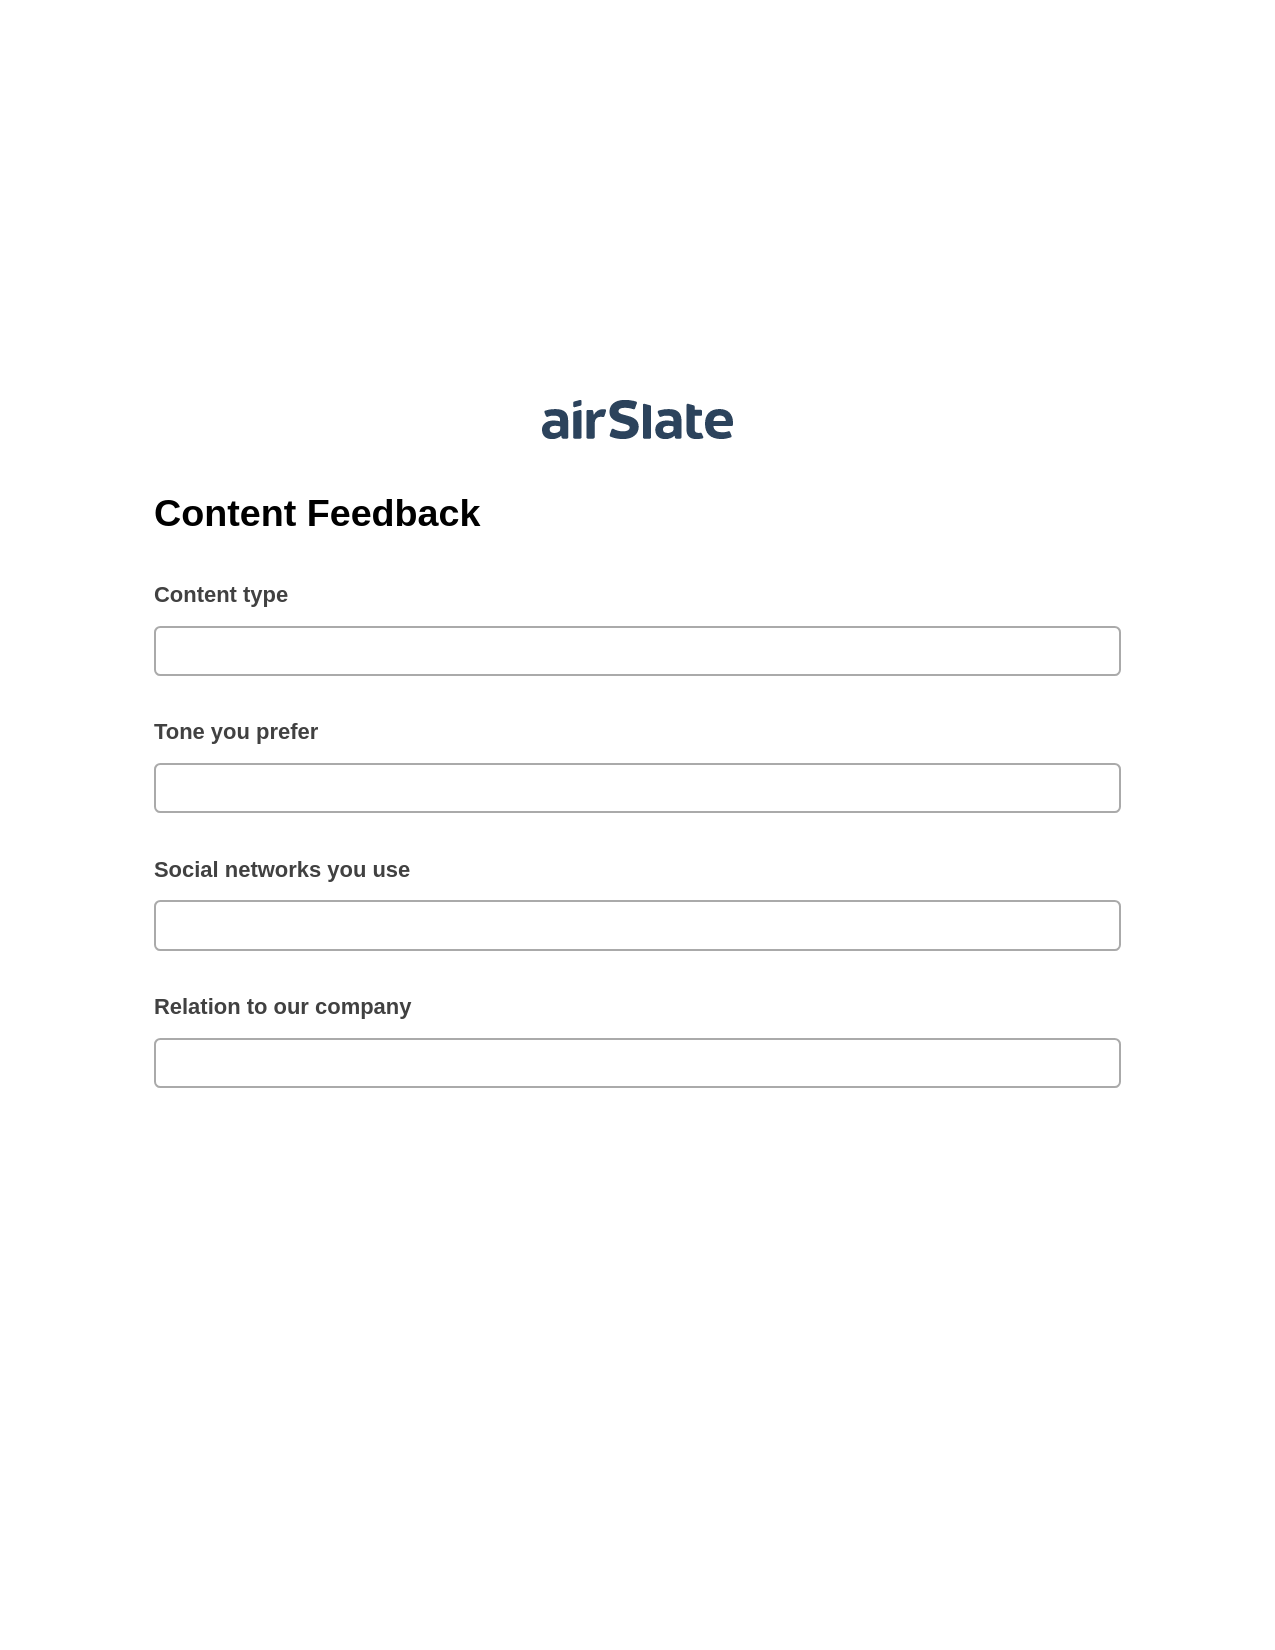 Content Feedback Pre-fill Dropdowns from CSV File Bot, Lock the slate bot, Archive to SharePoint Folder Bot